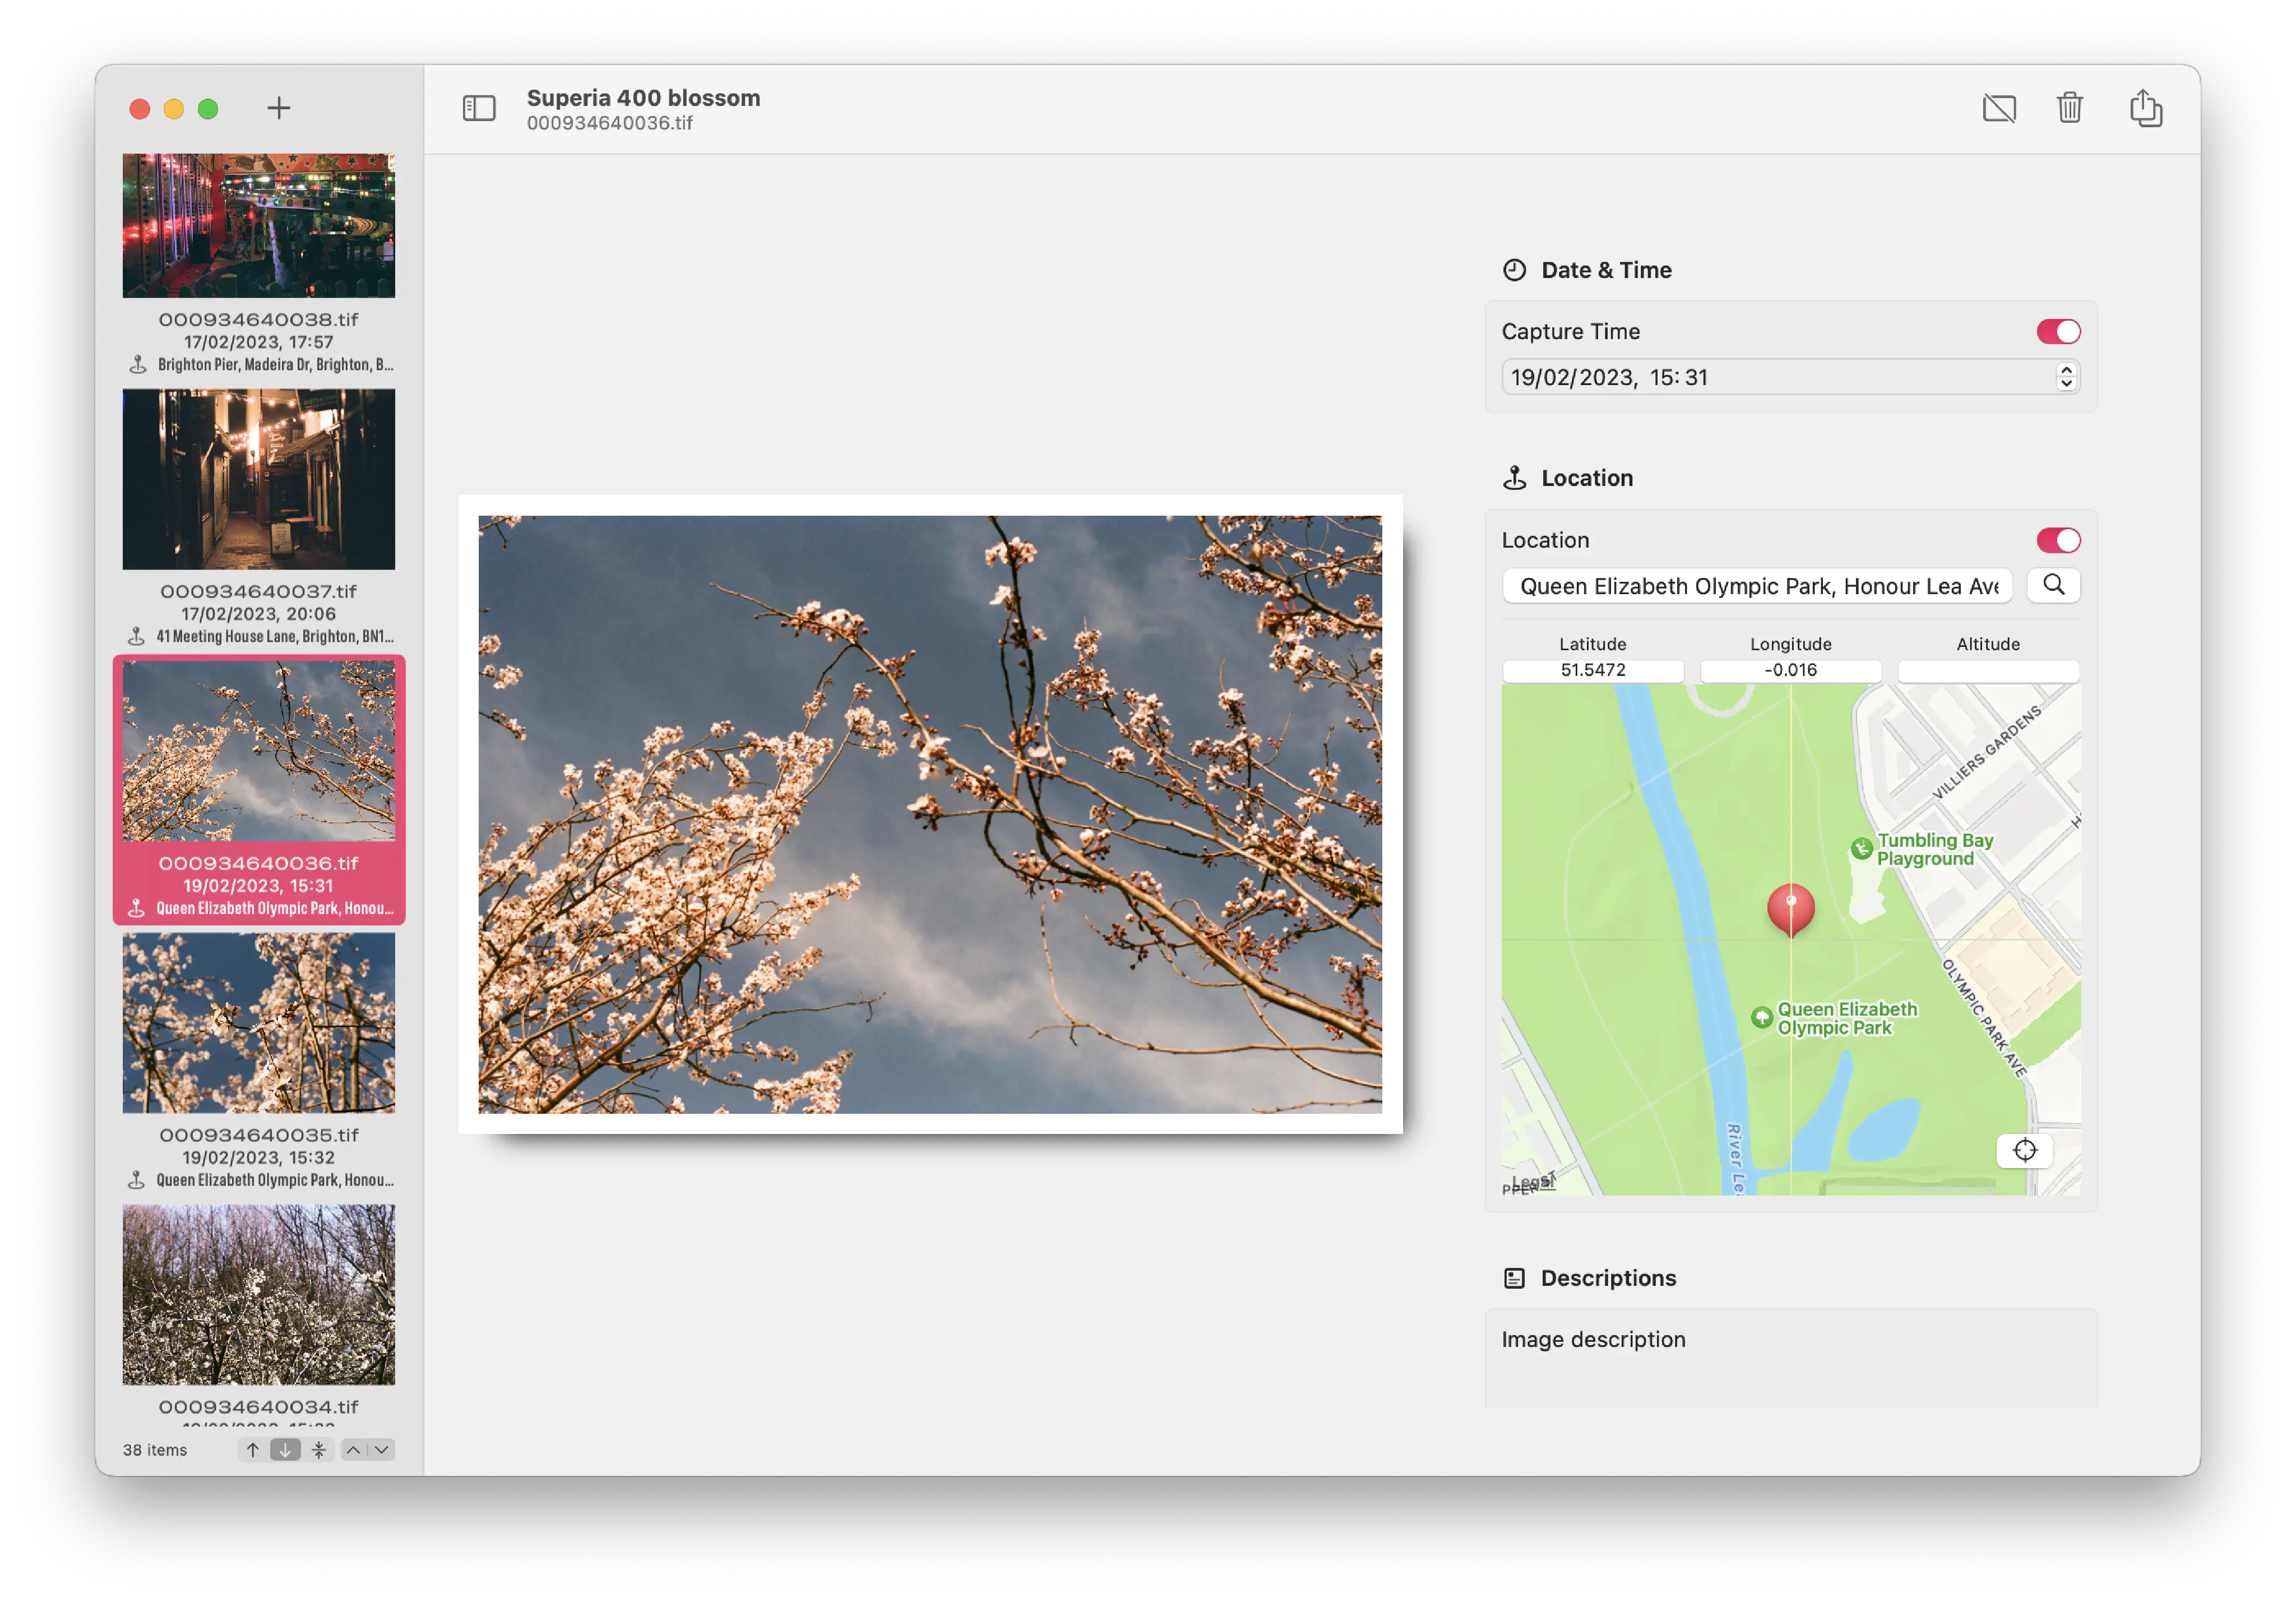 Another Unspool screenshot, this time with a photo of pink blossom on two trees against a blue sky selected. In the detail pane, the image is shown with a white border suggesting a print, alongside controls allowing the app’s user to set the capture time and the location (by searching, or by setting latitude, longitude, and altitude) along with an image description.